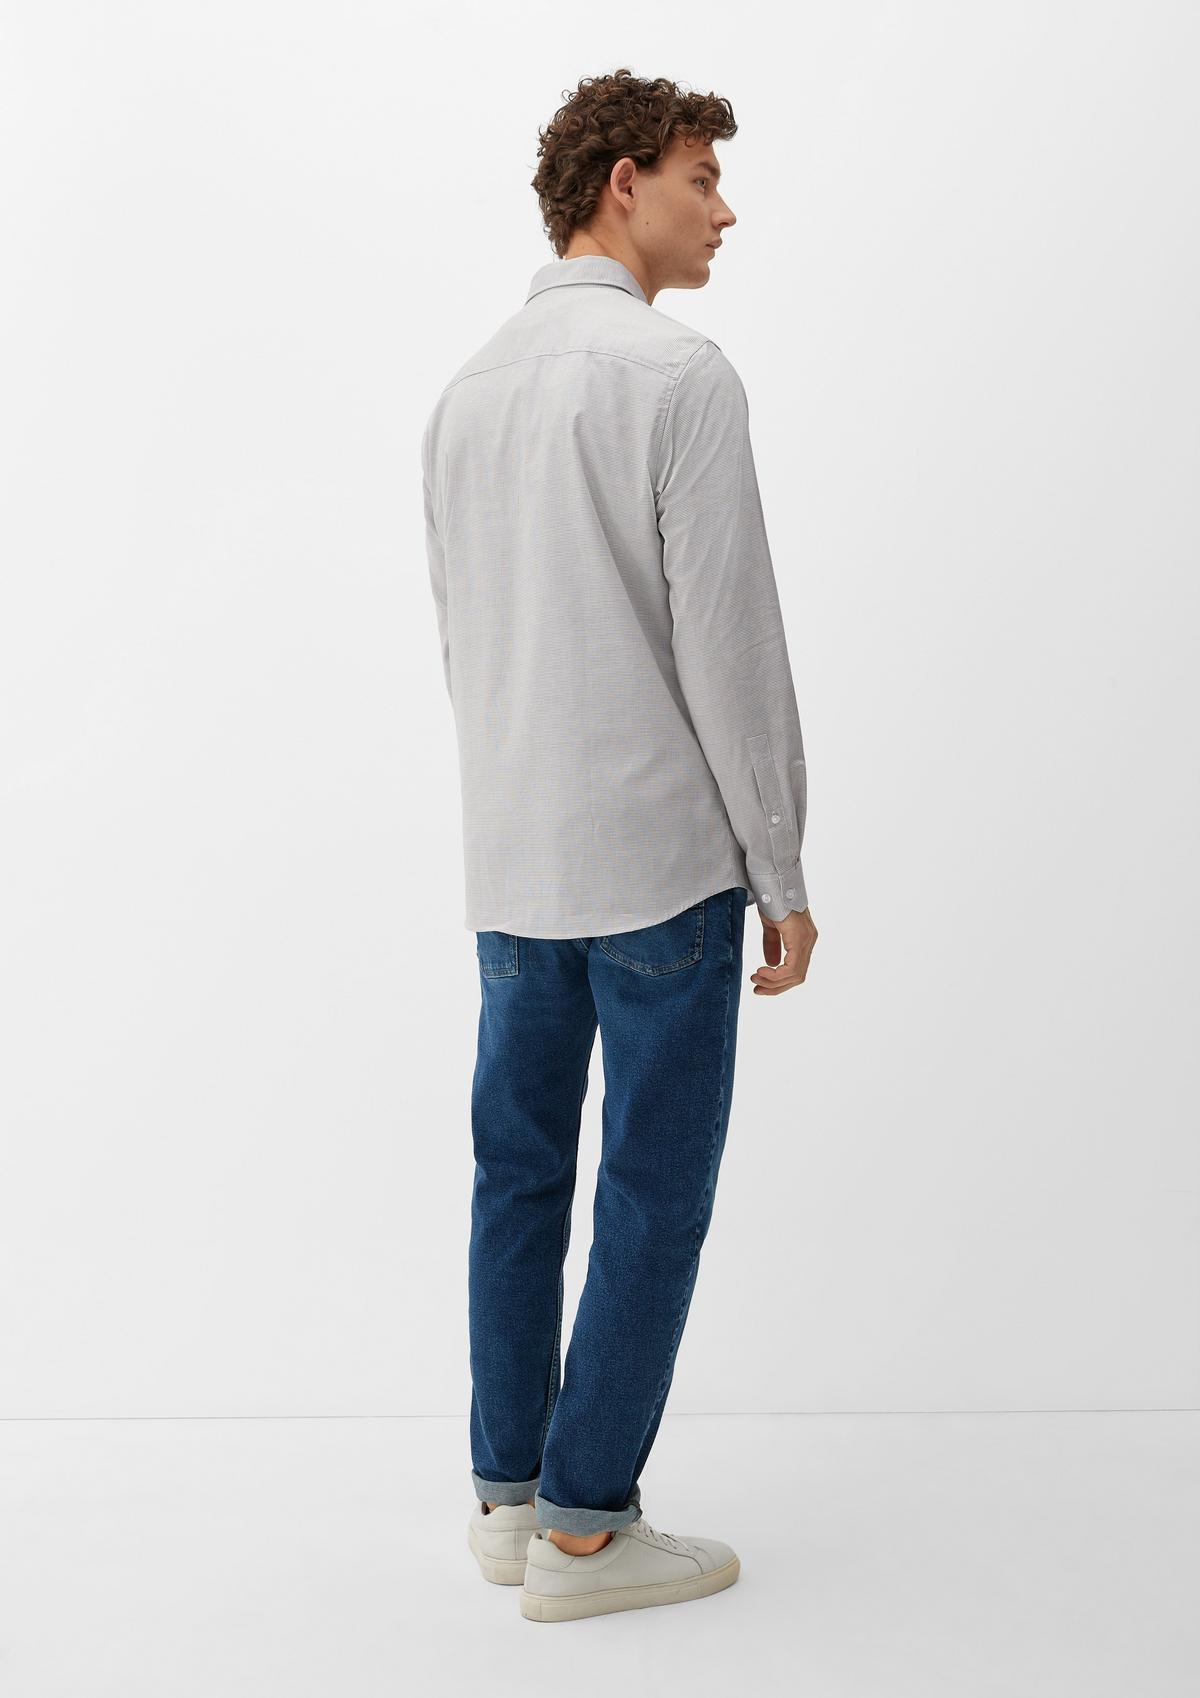 s.Oliver Slim fit: Shirt with a minimalist pattern